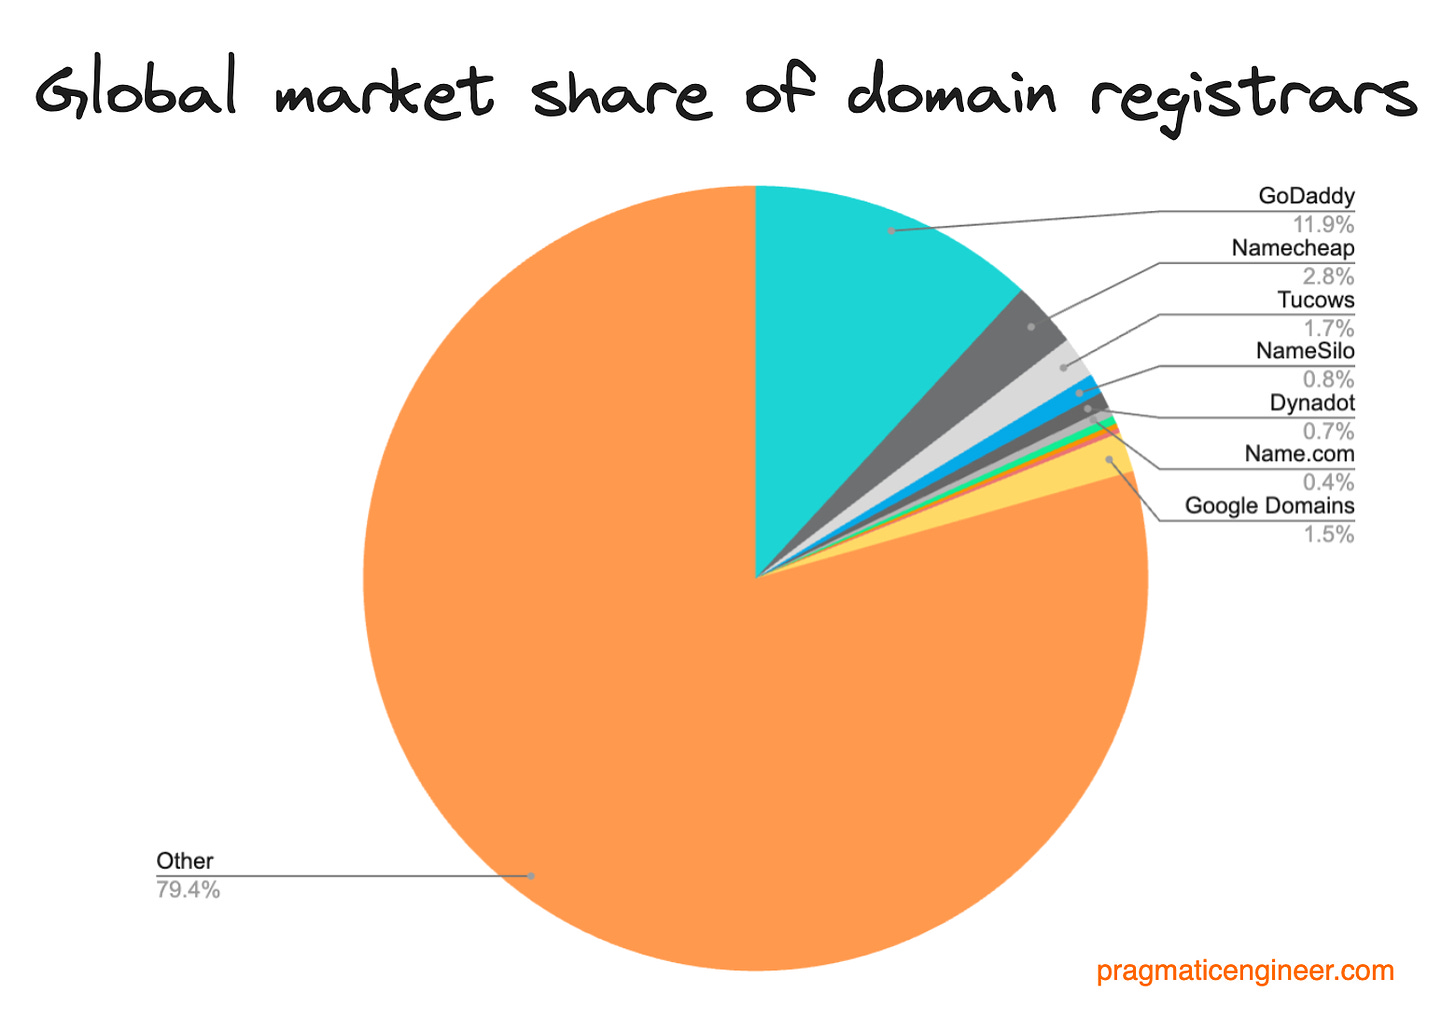 The global market share of domain registrars, based on the total number of domain names managed. Only GoDaddy has double digit market share. Source: Domain Name Stat